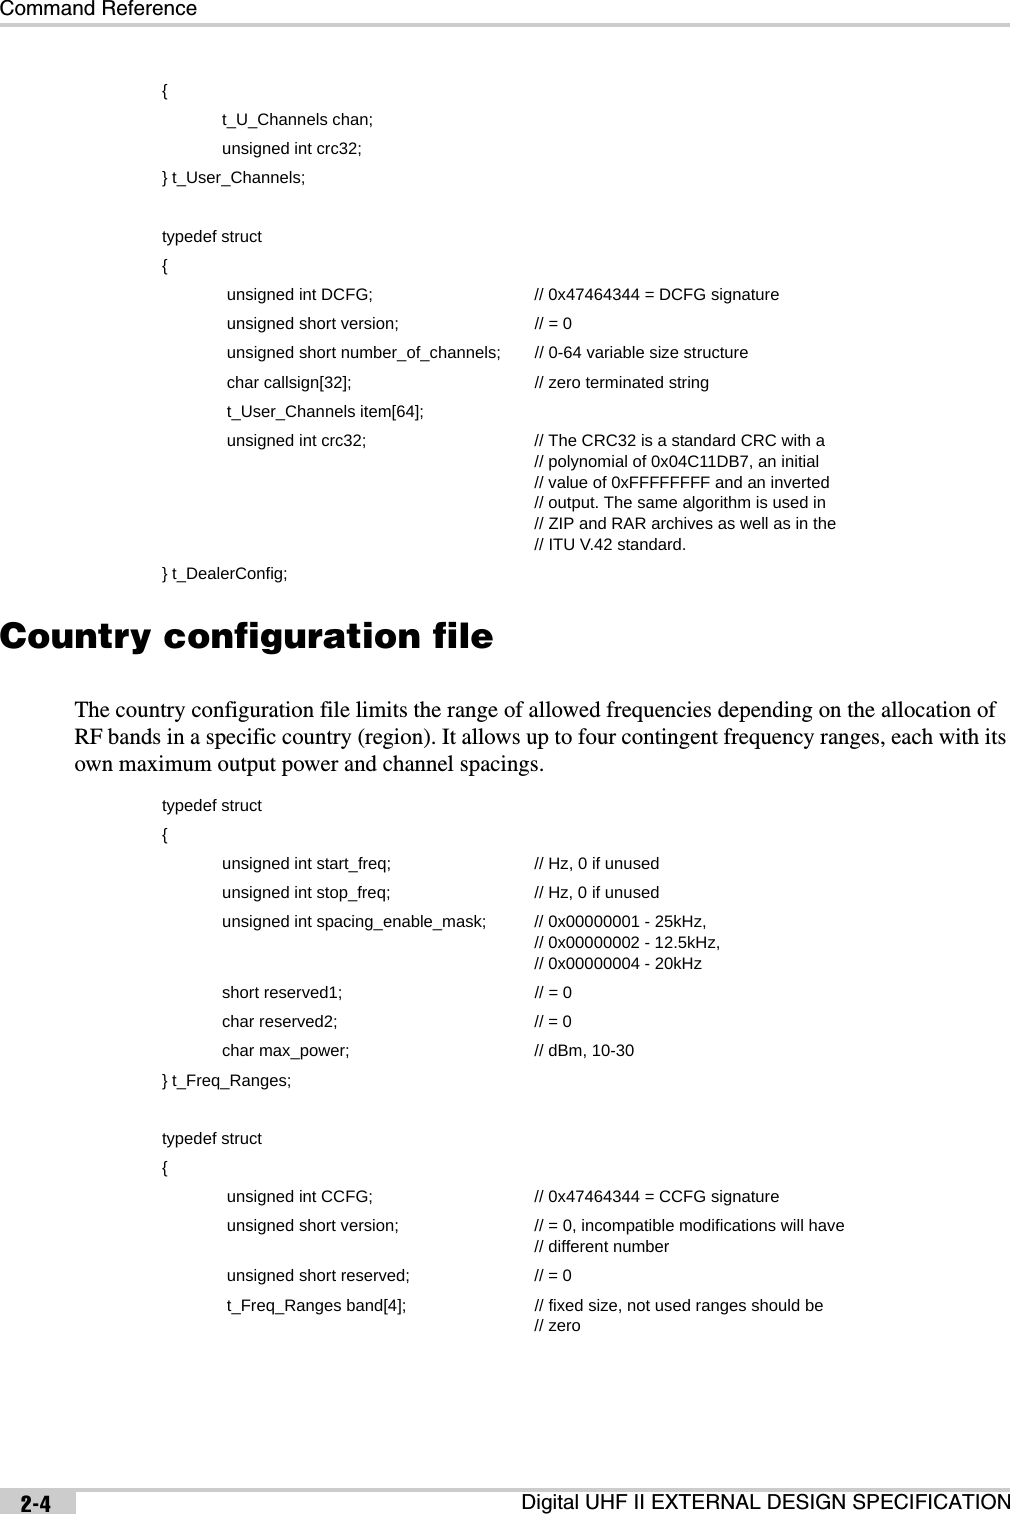 Command ReferenceDigital UHF II EXTERNAL DESIGN SPECIFICATION2-4Country configuration fileThe country configuration file limits the range of allowed frequencies depending on the allocation of RF bands in a specific country (region). It allows up to four contingent frequency ranges, each with its own maximum output power and channel spacings. {             t_U_Channels chan;             unsigned int crc32;} t_User_Channels;typedef struct{              unsigned int DCFG; // 0x47464344 = DCFG signature              unsigned short version; // = 0              unsigned short number_of_channels; // 0-64 variable size structure              char callsign[32]; // zero terminated string              t_User_Channels item[64];              unsigned int crc32; // The CRC32 is a standard CRC with a// polynomial of 0x04C11DB7, an initial// value of 0xFFFFFFFF and an inverted// output. The same algorithm is used in// ZIP and RAR archives as well as in the// ITU V.42 standard.} t_DealerConfig;typedef struct{             unsigned int start_freq;  // Hz, 0 if unused             unsigned int stop_freq; // Hz, 0 if unused             unsigned int spacing_enable_mask; // 0x00000001 - 25kHz, // 0x00000002 - 12.5kHz,// 0x00000004 - 20kHz             short reserved1; // = 0             char reserved2; // = 0             char max_power; // dBm, 10-30} t_Freq_Ranges;typedef struct{              unsigned int CCFG; // 0x47464344 = CCFG signature              unsigned short version; // = 0, incompatible modifications will have// different number              unsigned short reserved; // = 0              t_Freq_Ranges band[4]; // fixed size, not used ranges should be// zero